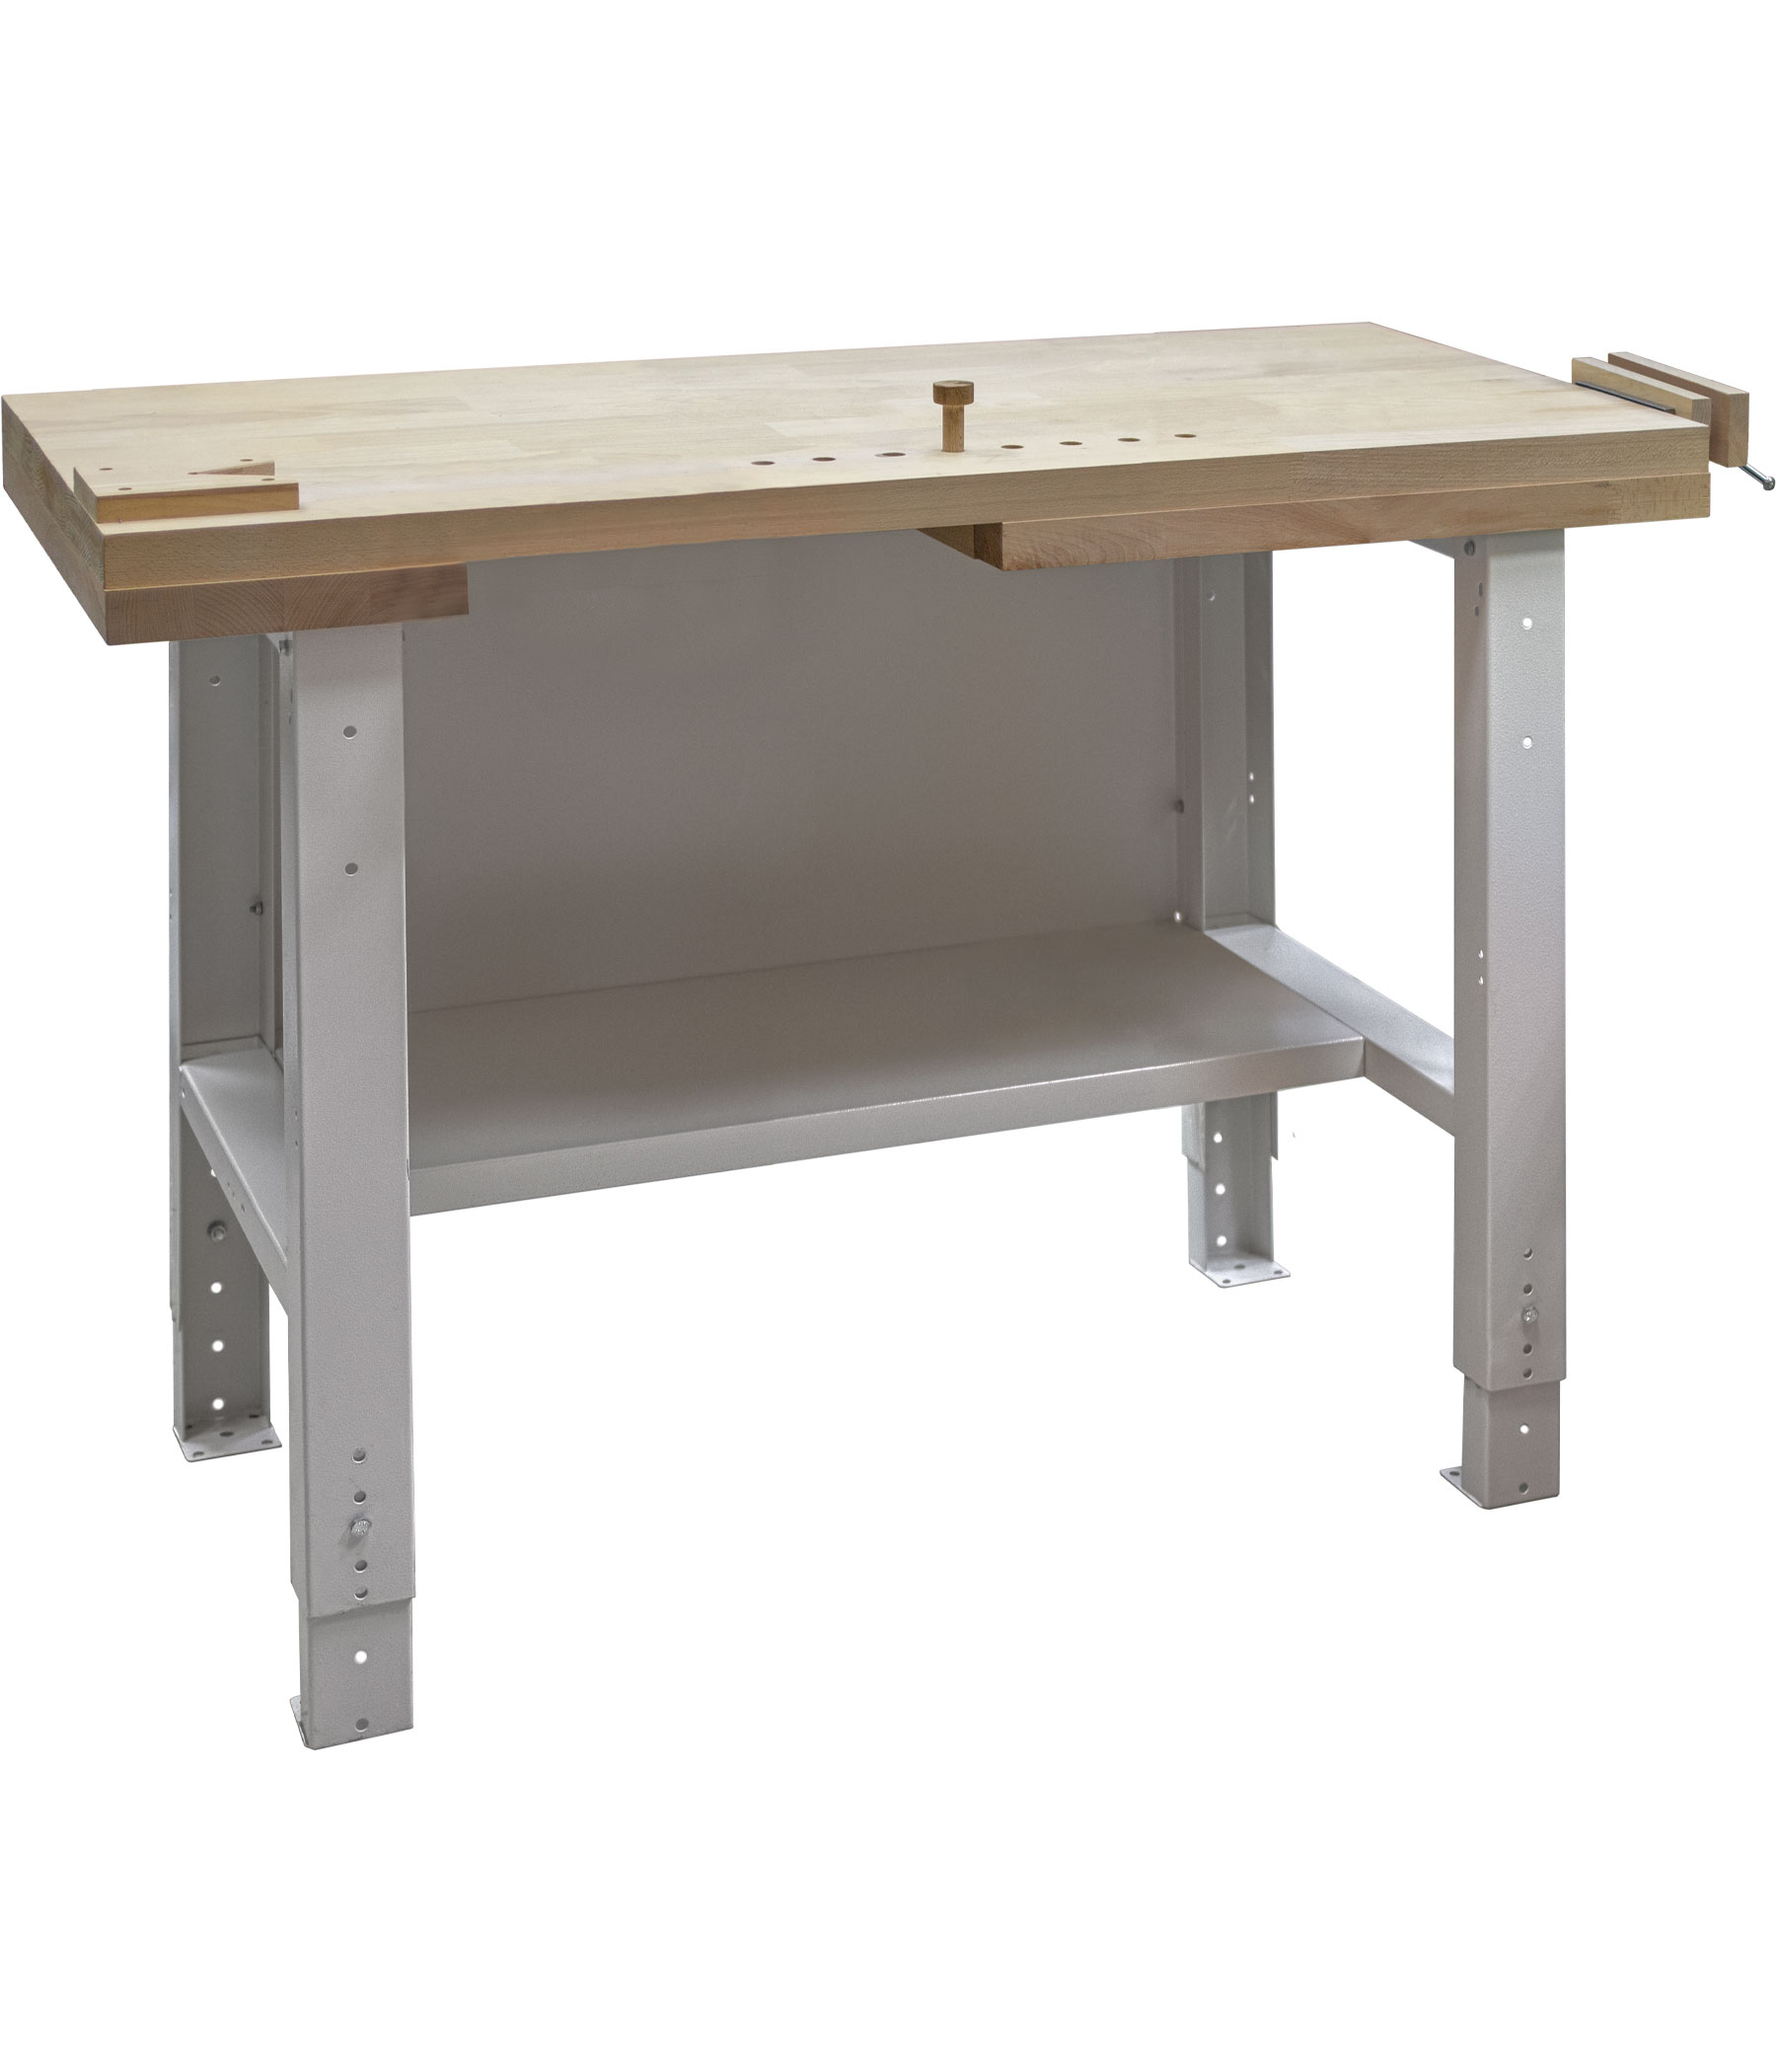 Joiner workbench VS 21 SV with side vice pack